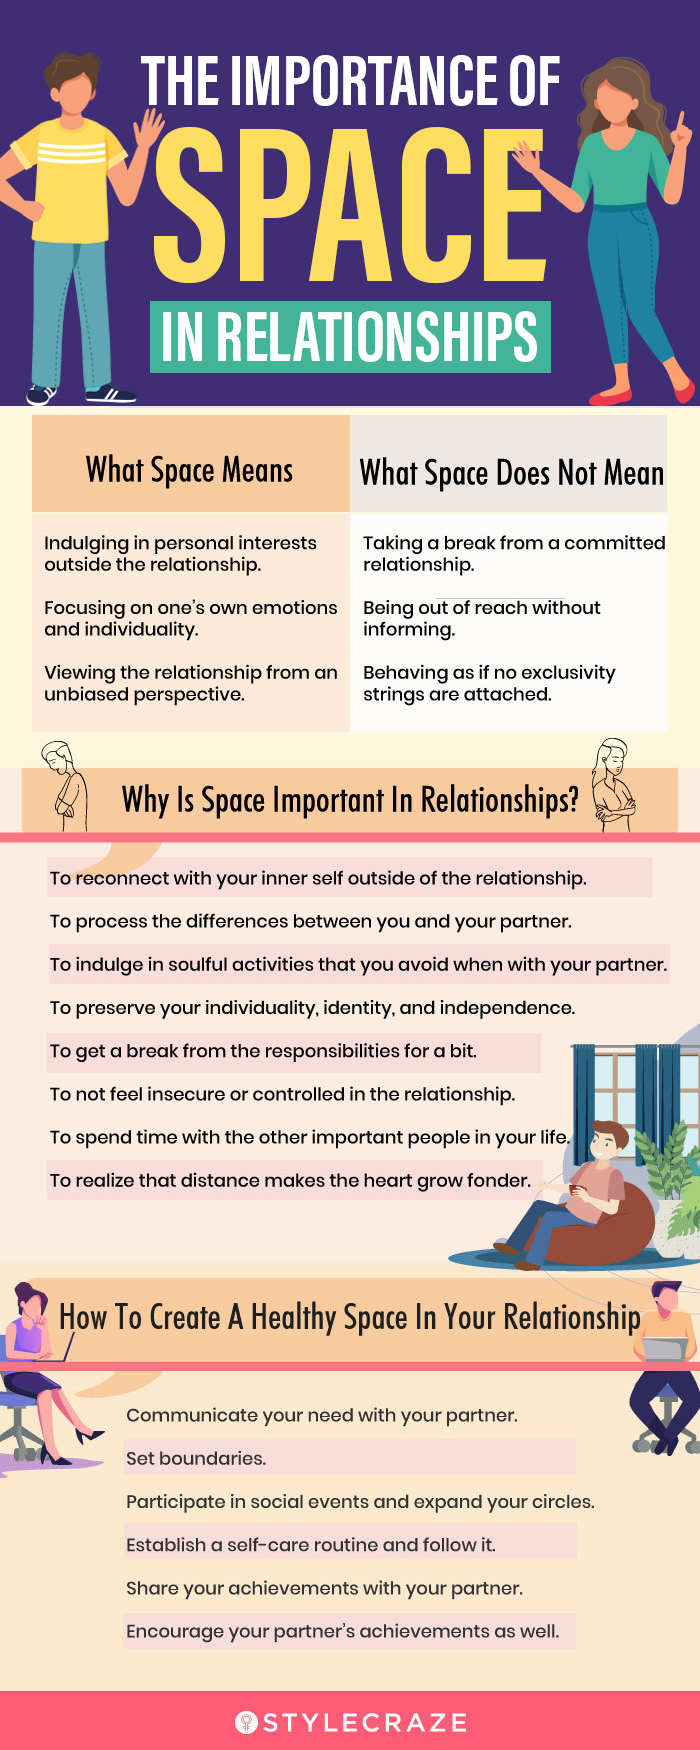 The importance of space in relationships [infographic]